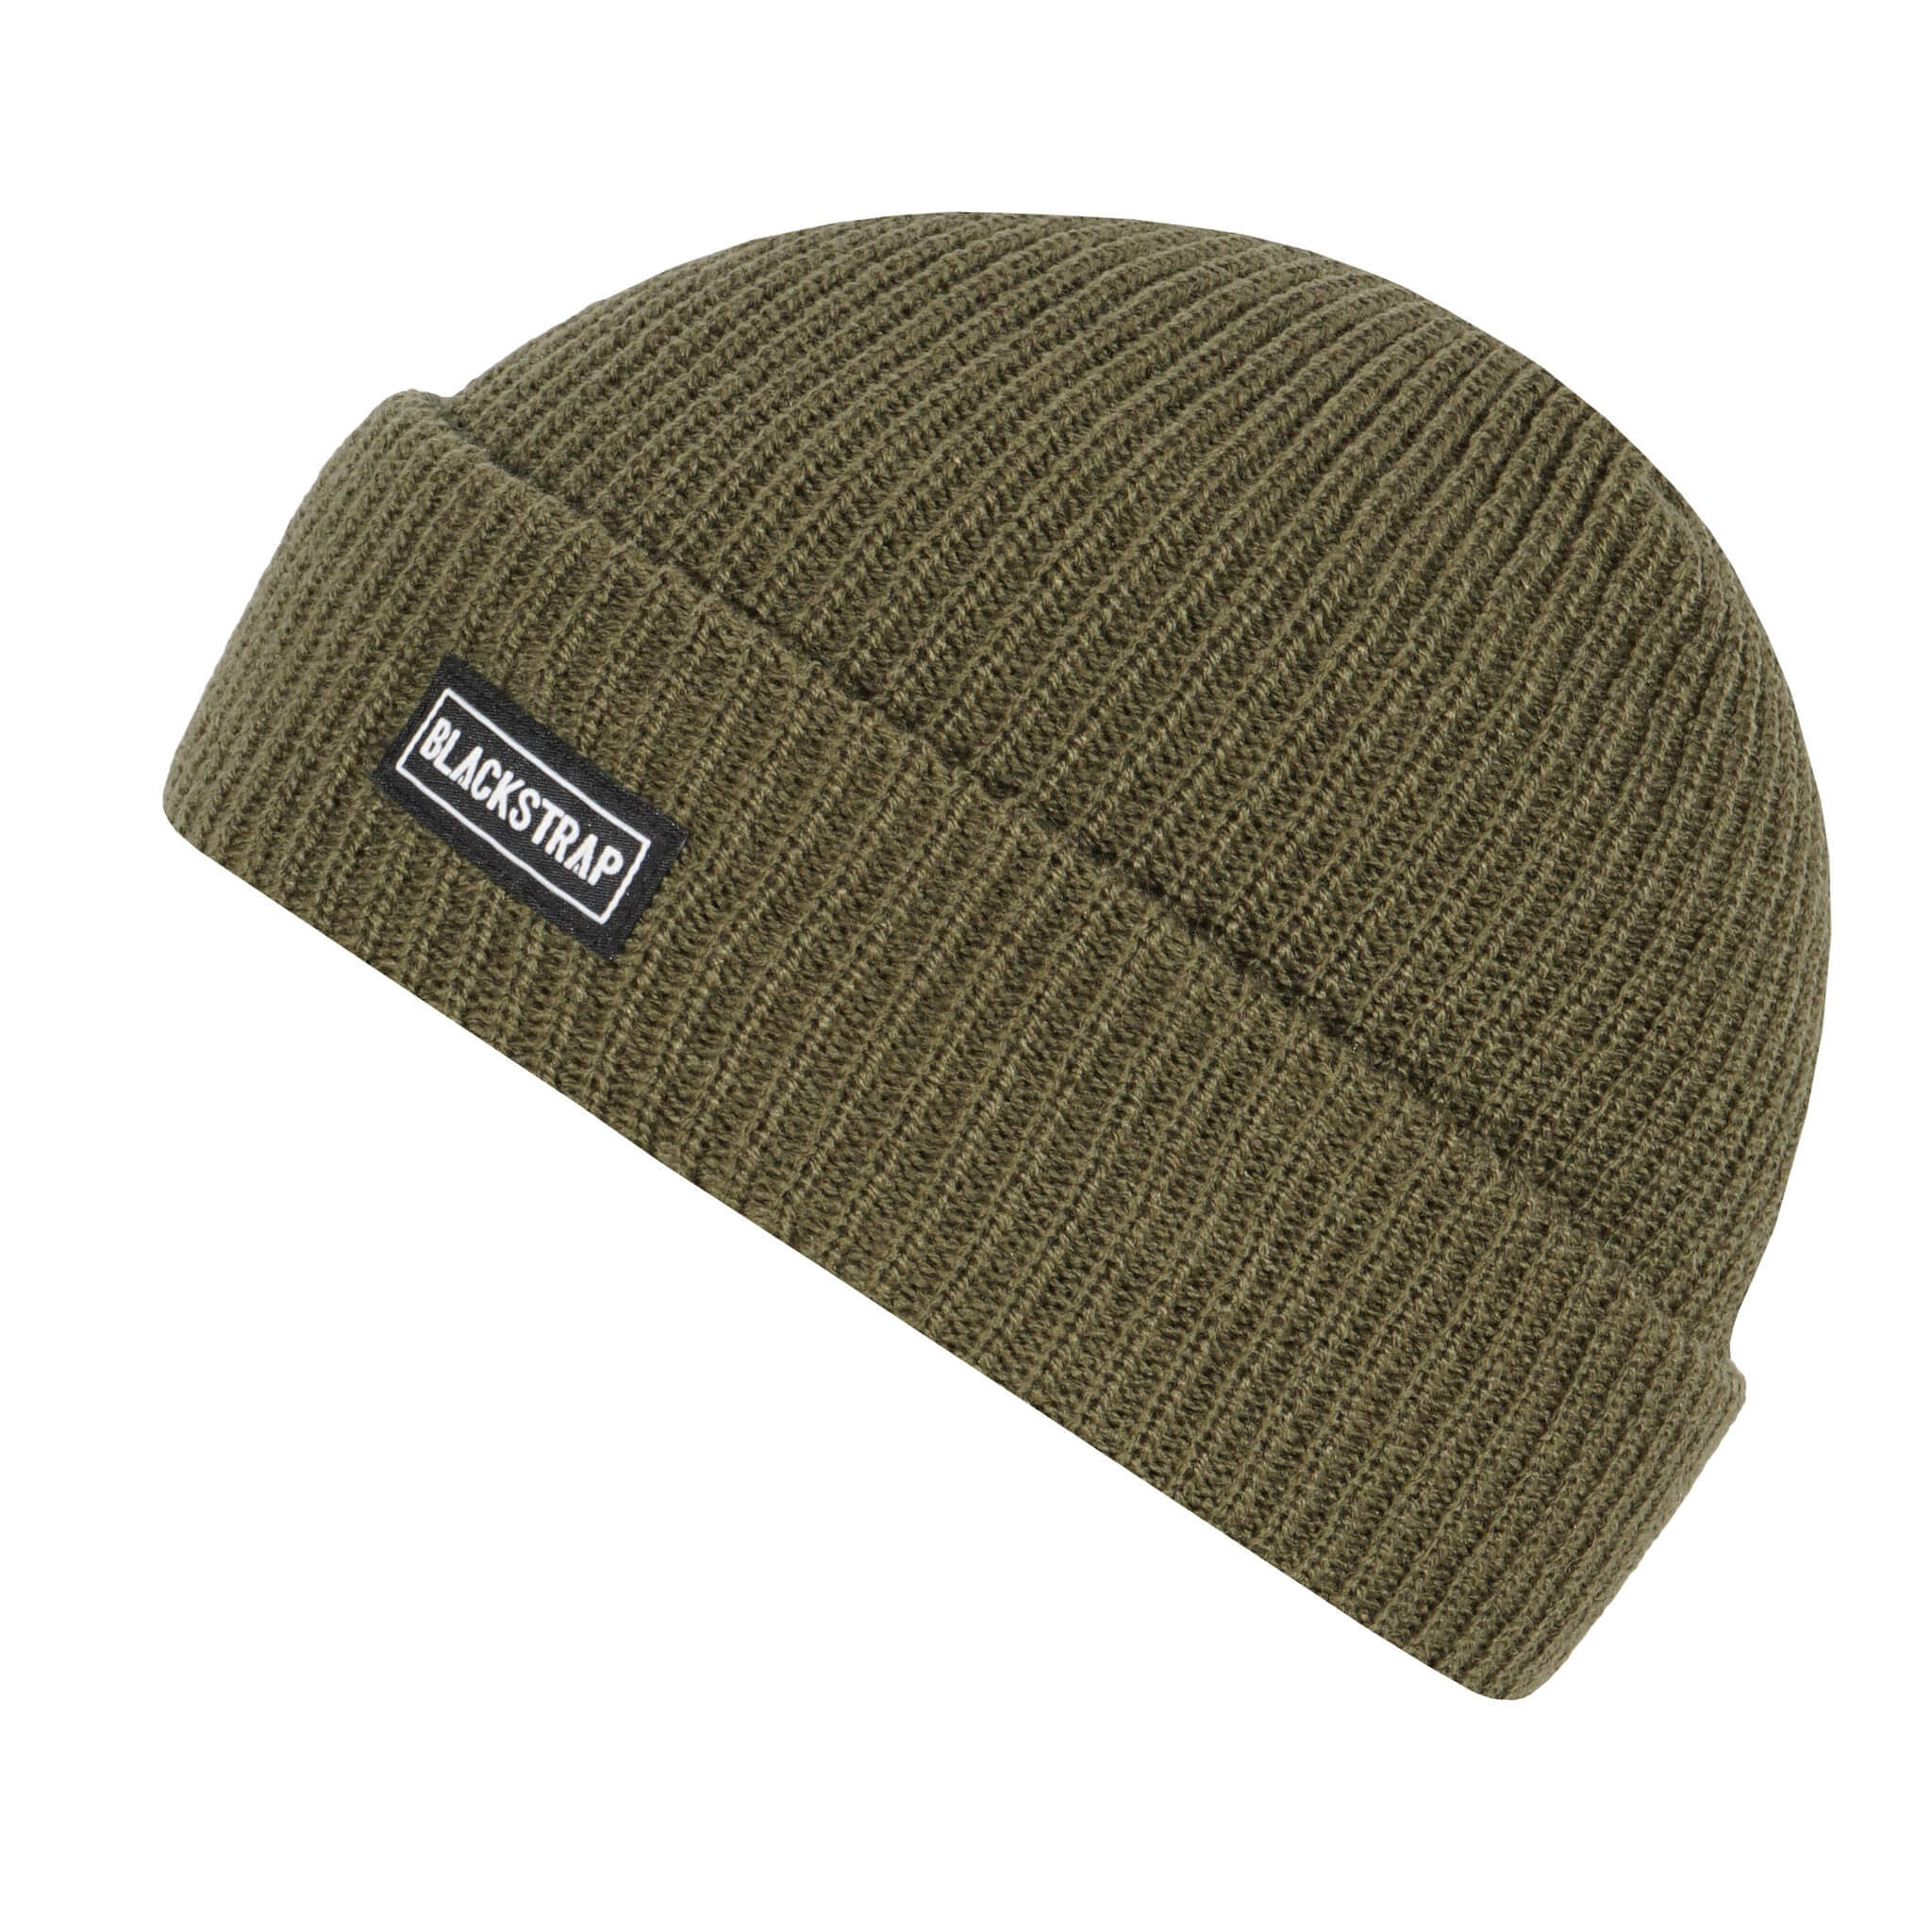 Classic Beanie BlackStrap Olive #color_olive